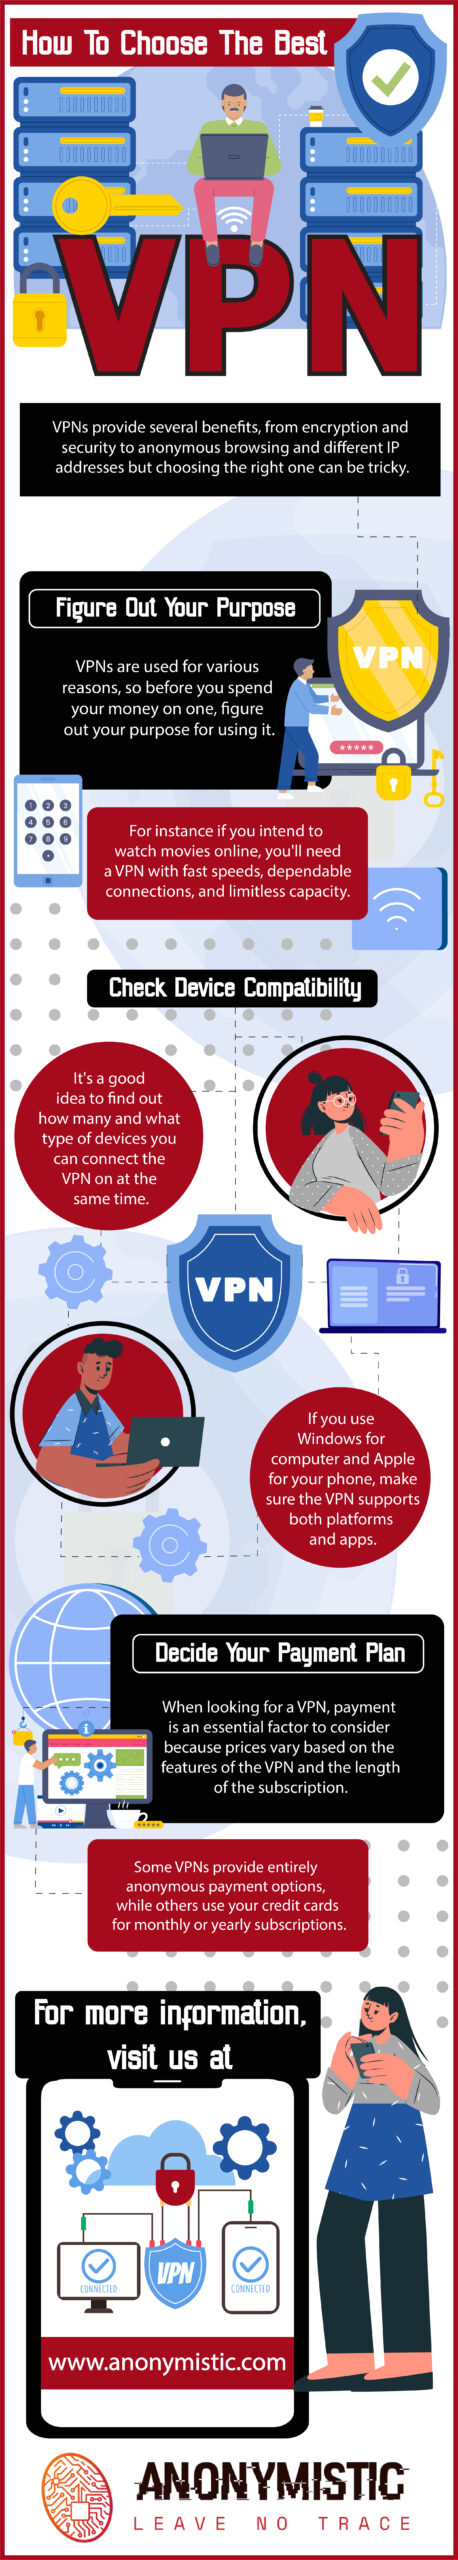 How to choose the right VPN